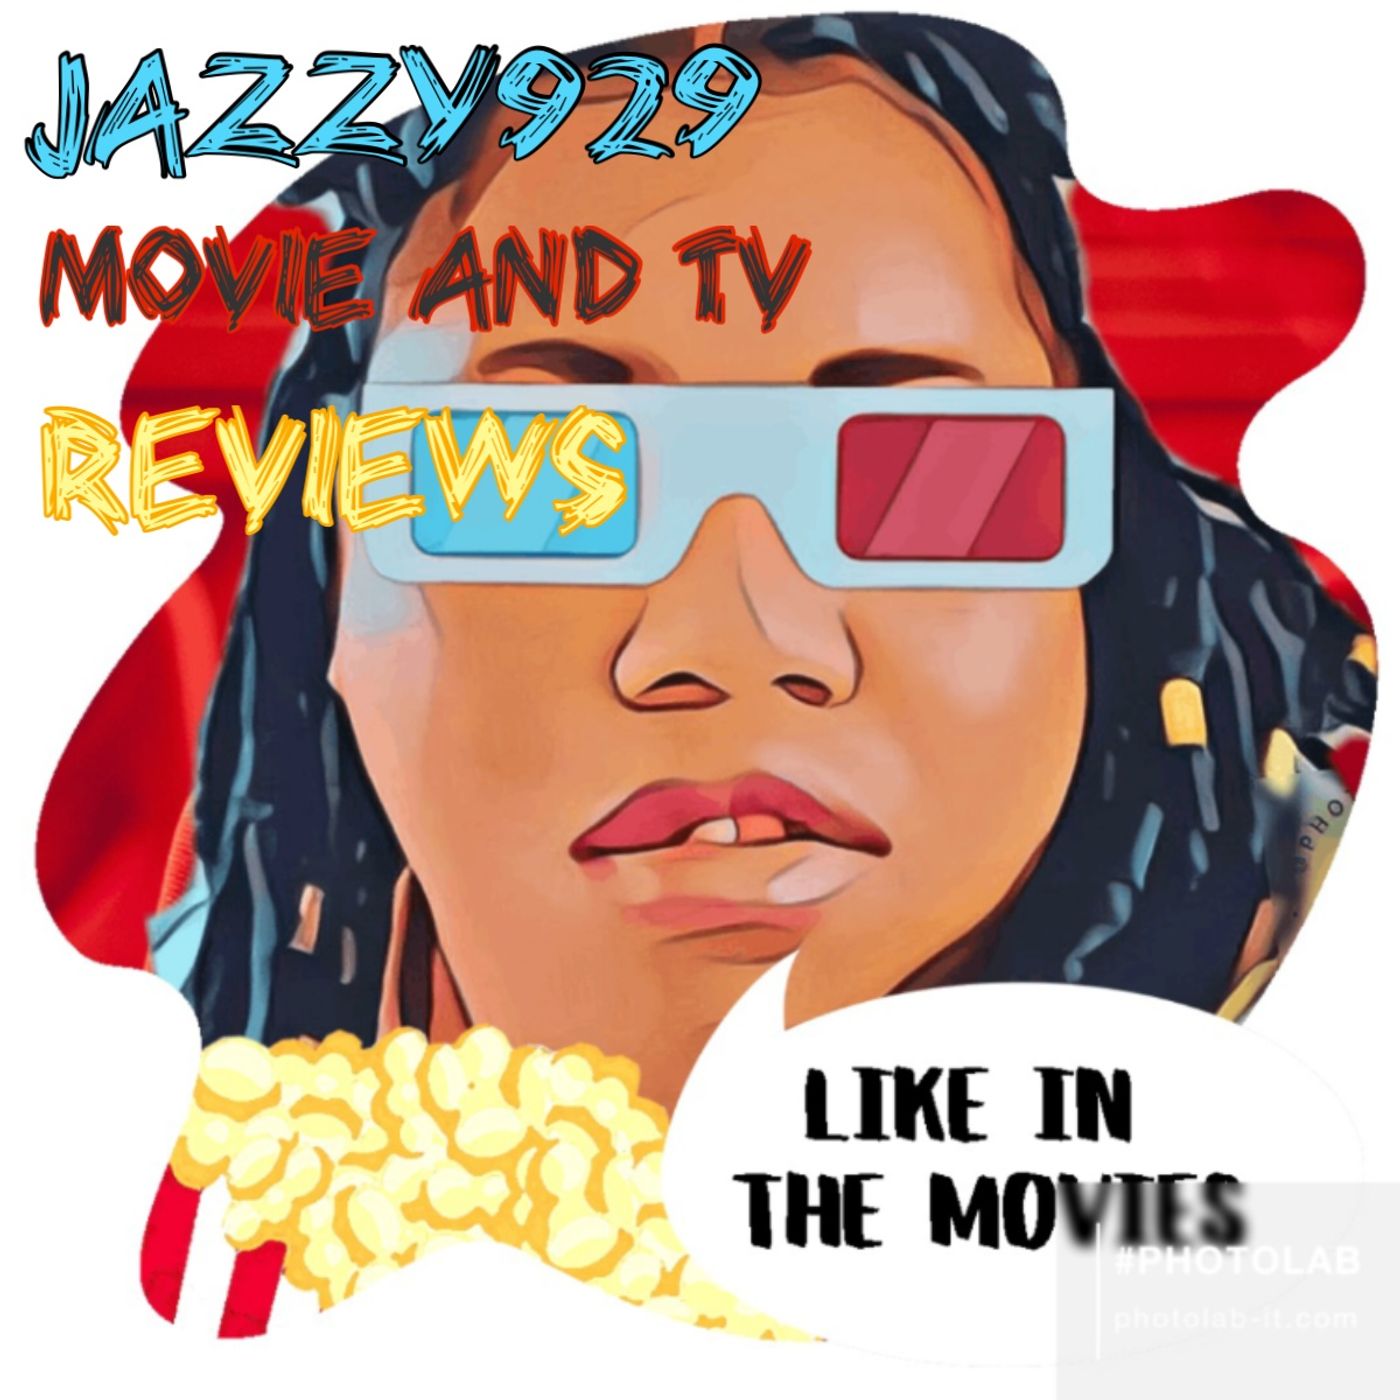 Jazzy929’s Movie And Tv Reviews